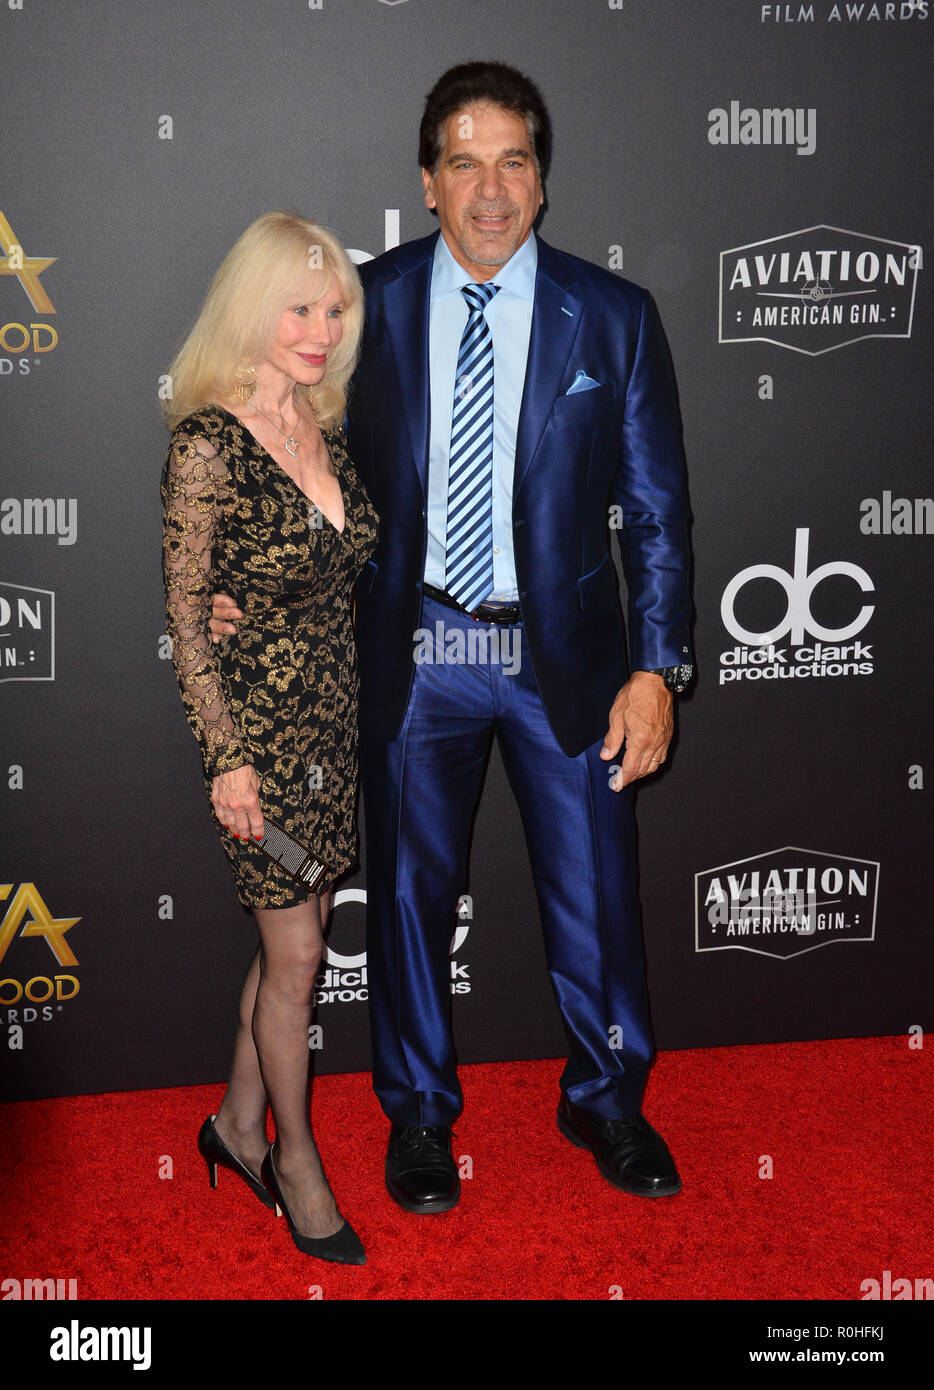 Los Angeles, USA. 04th Nov, 2018. LOS ANGELES, CA. November 04, 2018: Lou Ferrigno & Carla Ferrigno at the 22nd Annual Hollywood Film Awards at the Beverly Hilton Hotel. Picture Credit: Paul Smith/Alamy Live News Stock Photo